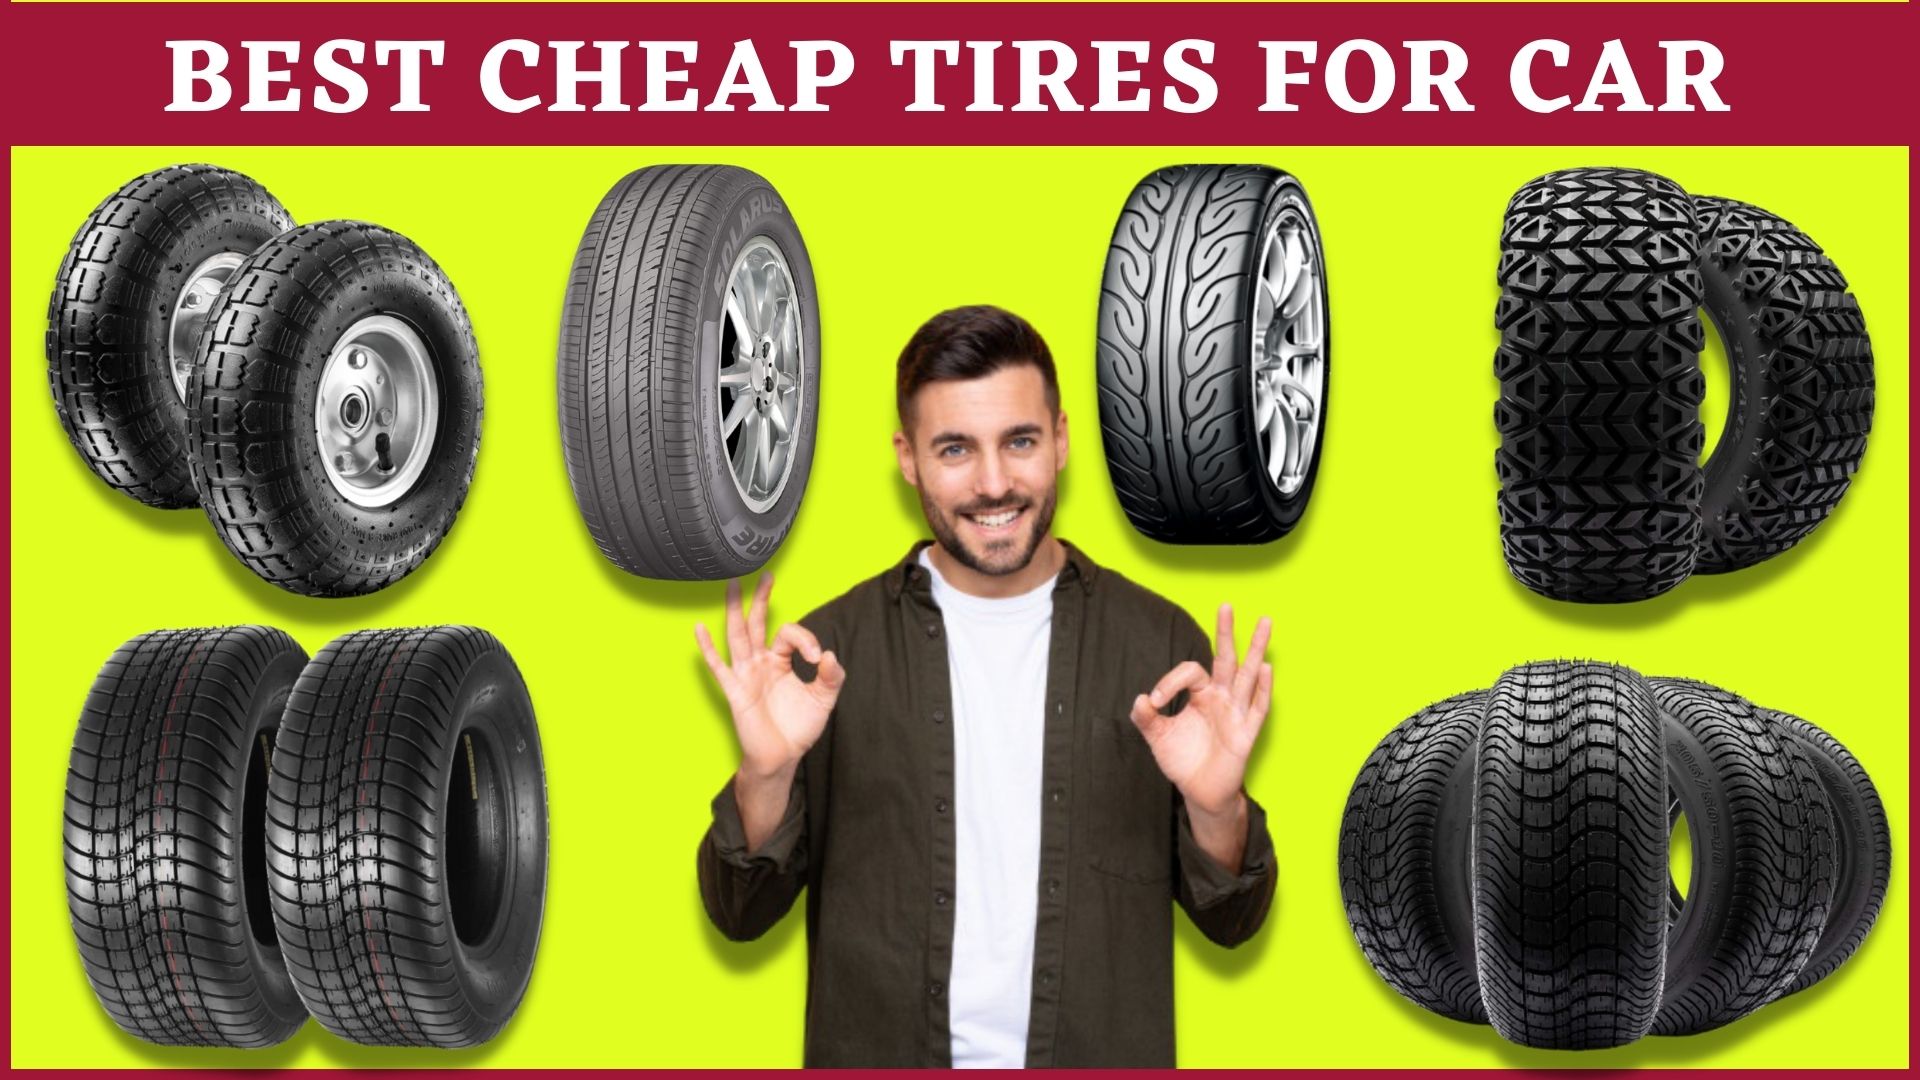 Best Cheap Tires For Car